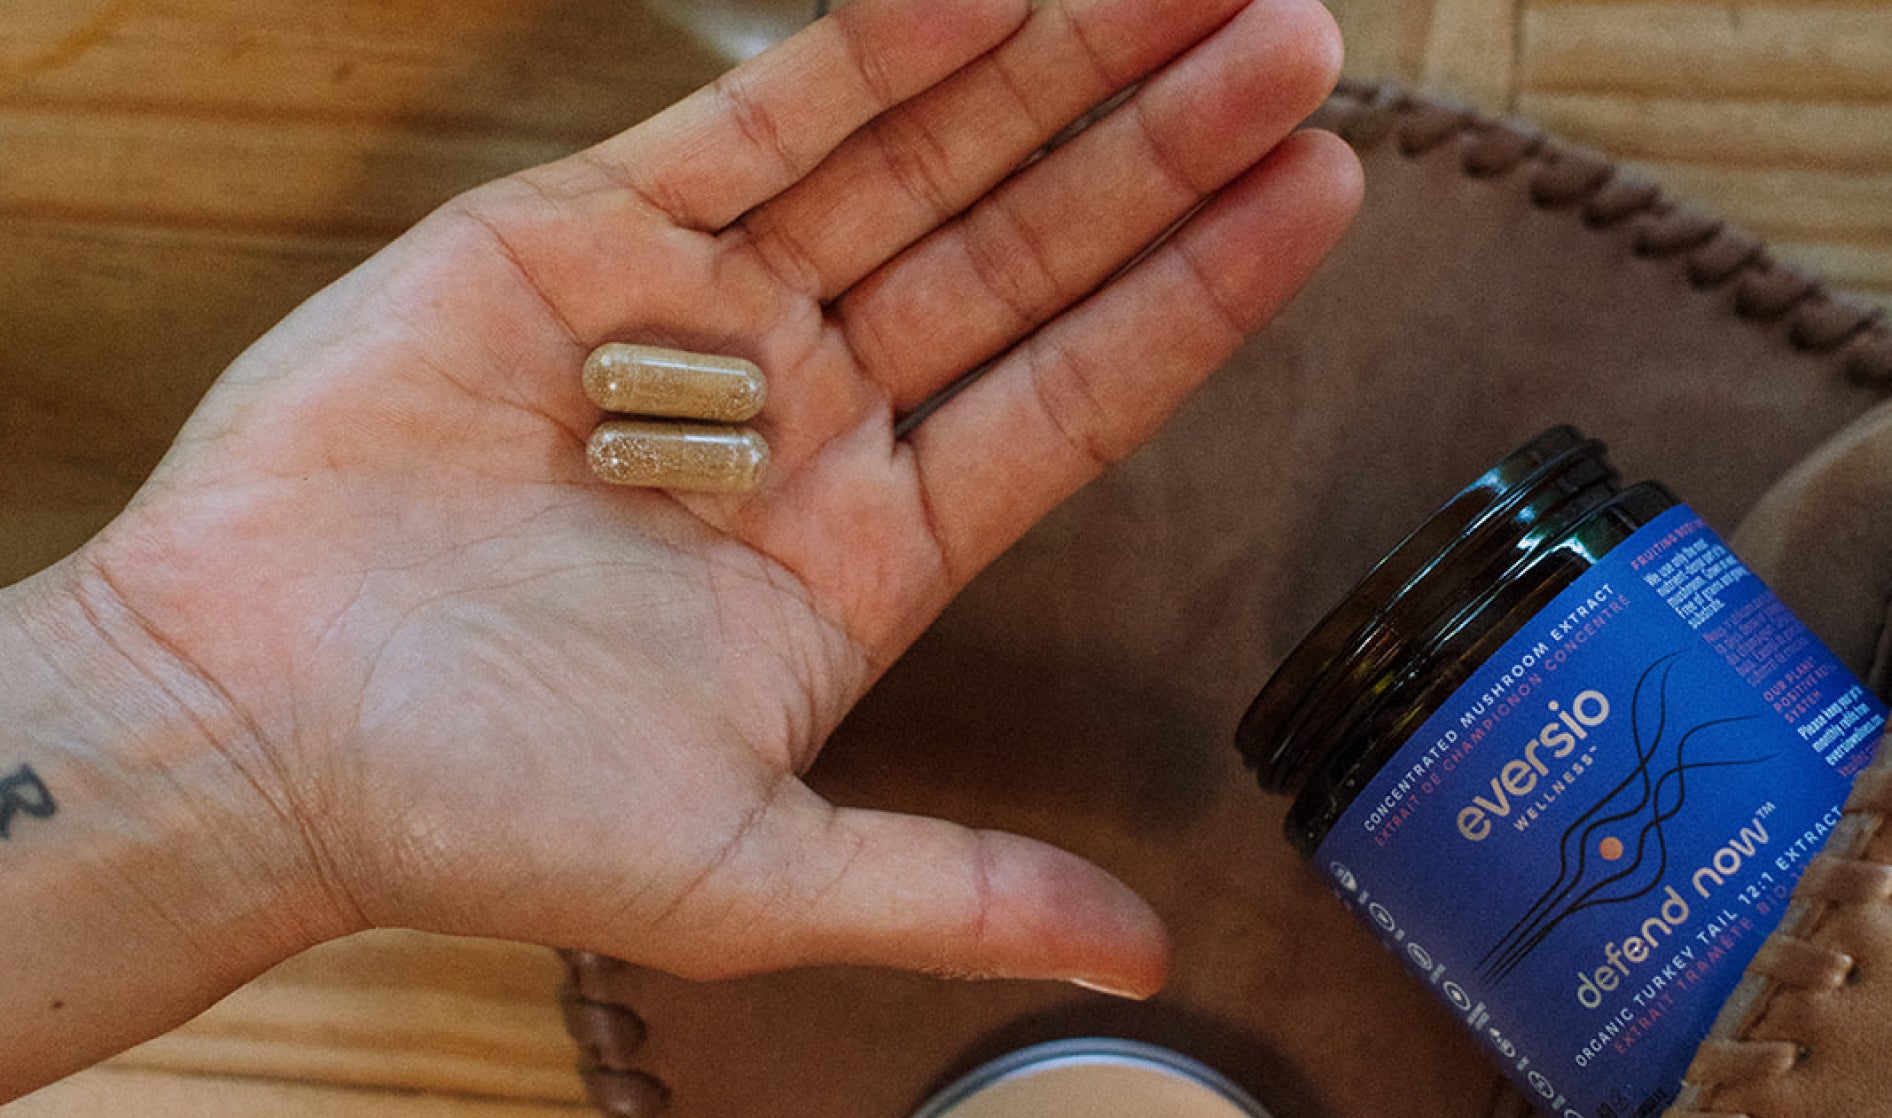 The Incredible with Turkey Tail Mushroom Supplements